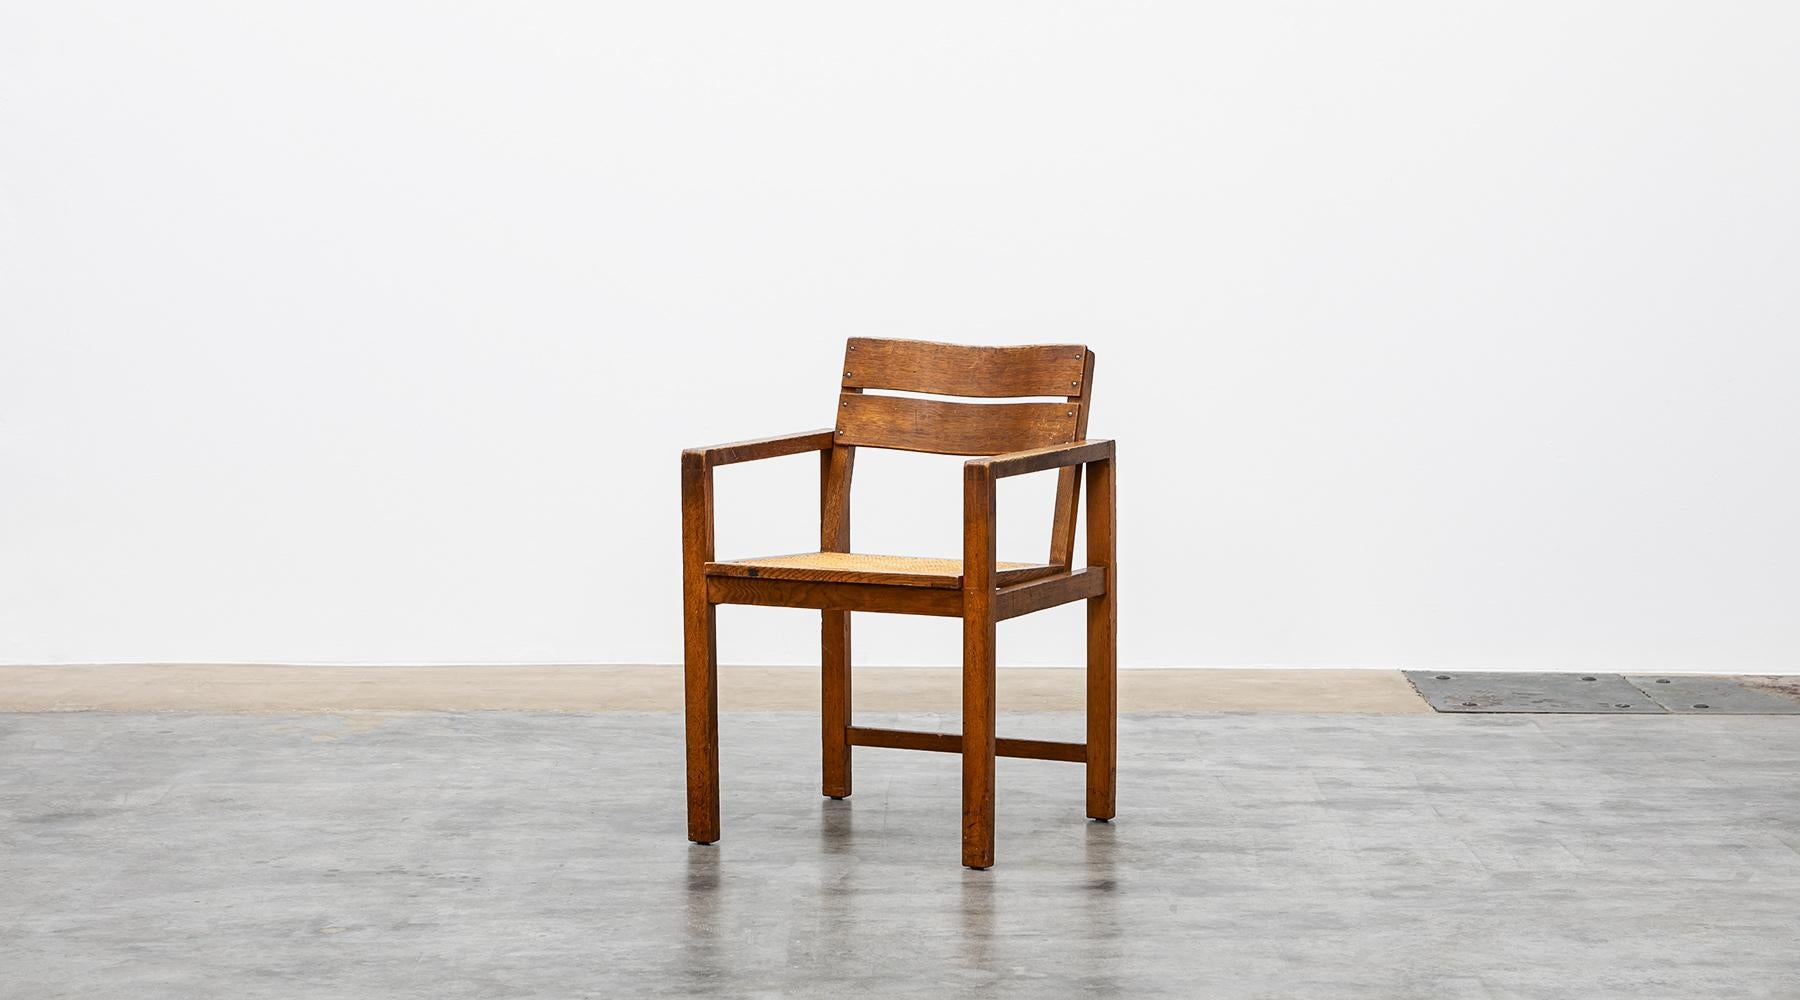 Beech chair by Erich Dieckmann, Germany, 1926.

The single chair by Erich Dieckmann from 1926 is made out of beech and has a typically, clear design. The rectangular stand construction contrasts with the curved backrest in plywood beech.